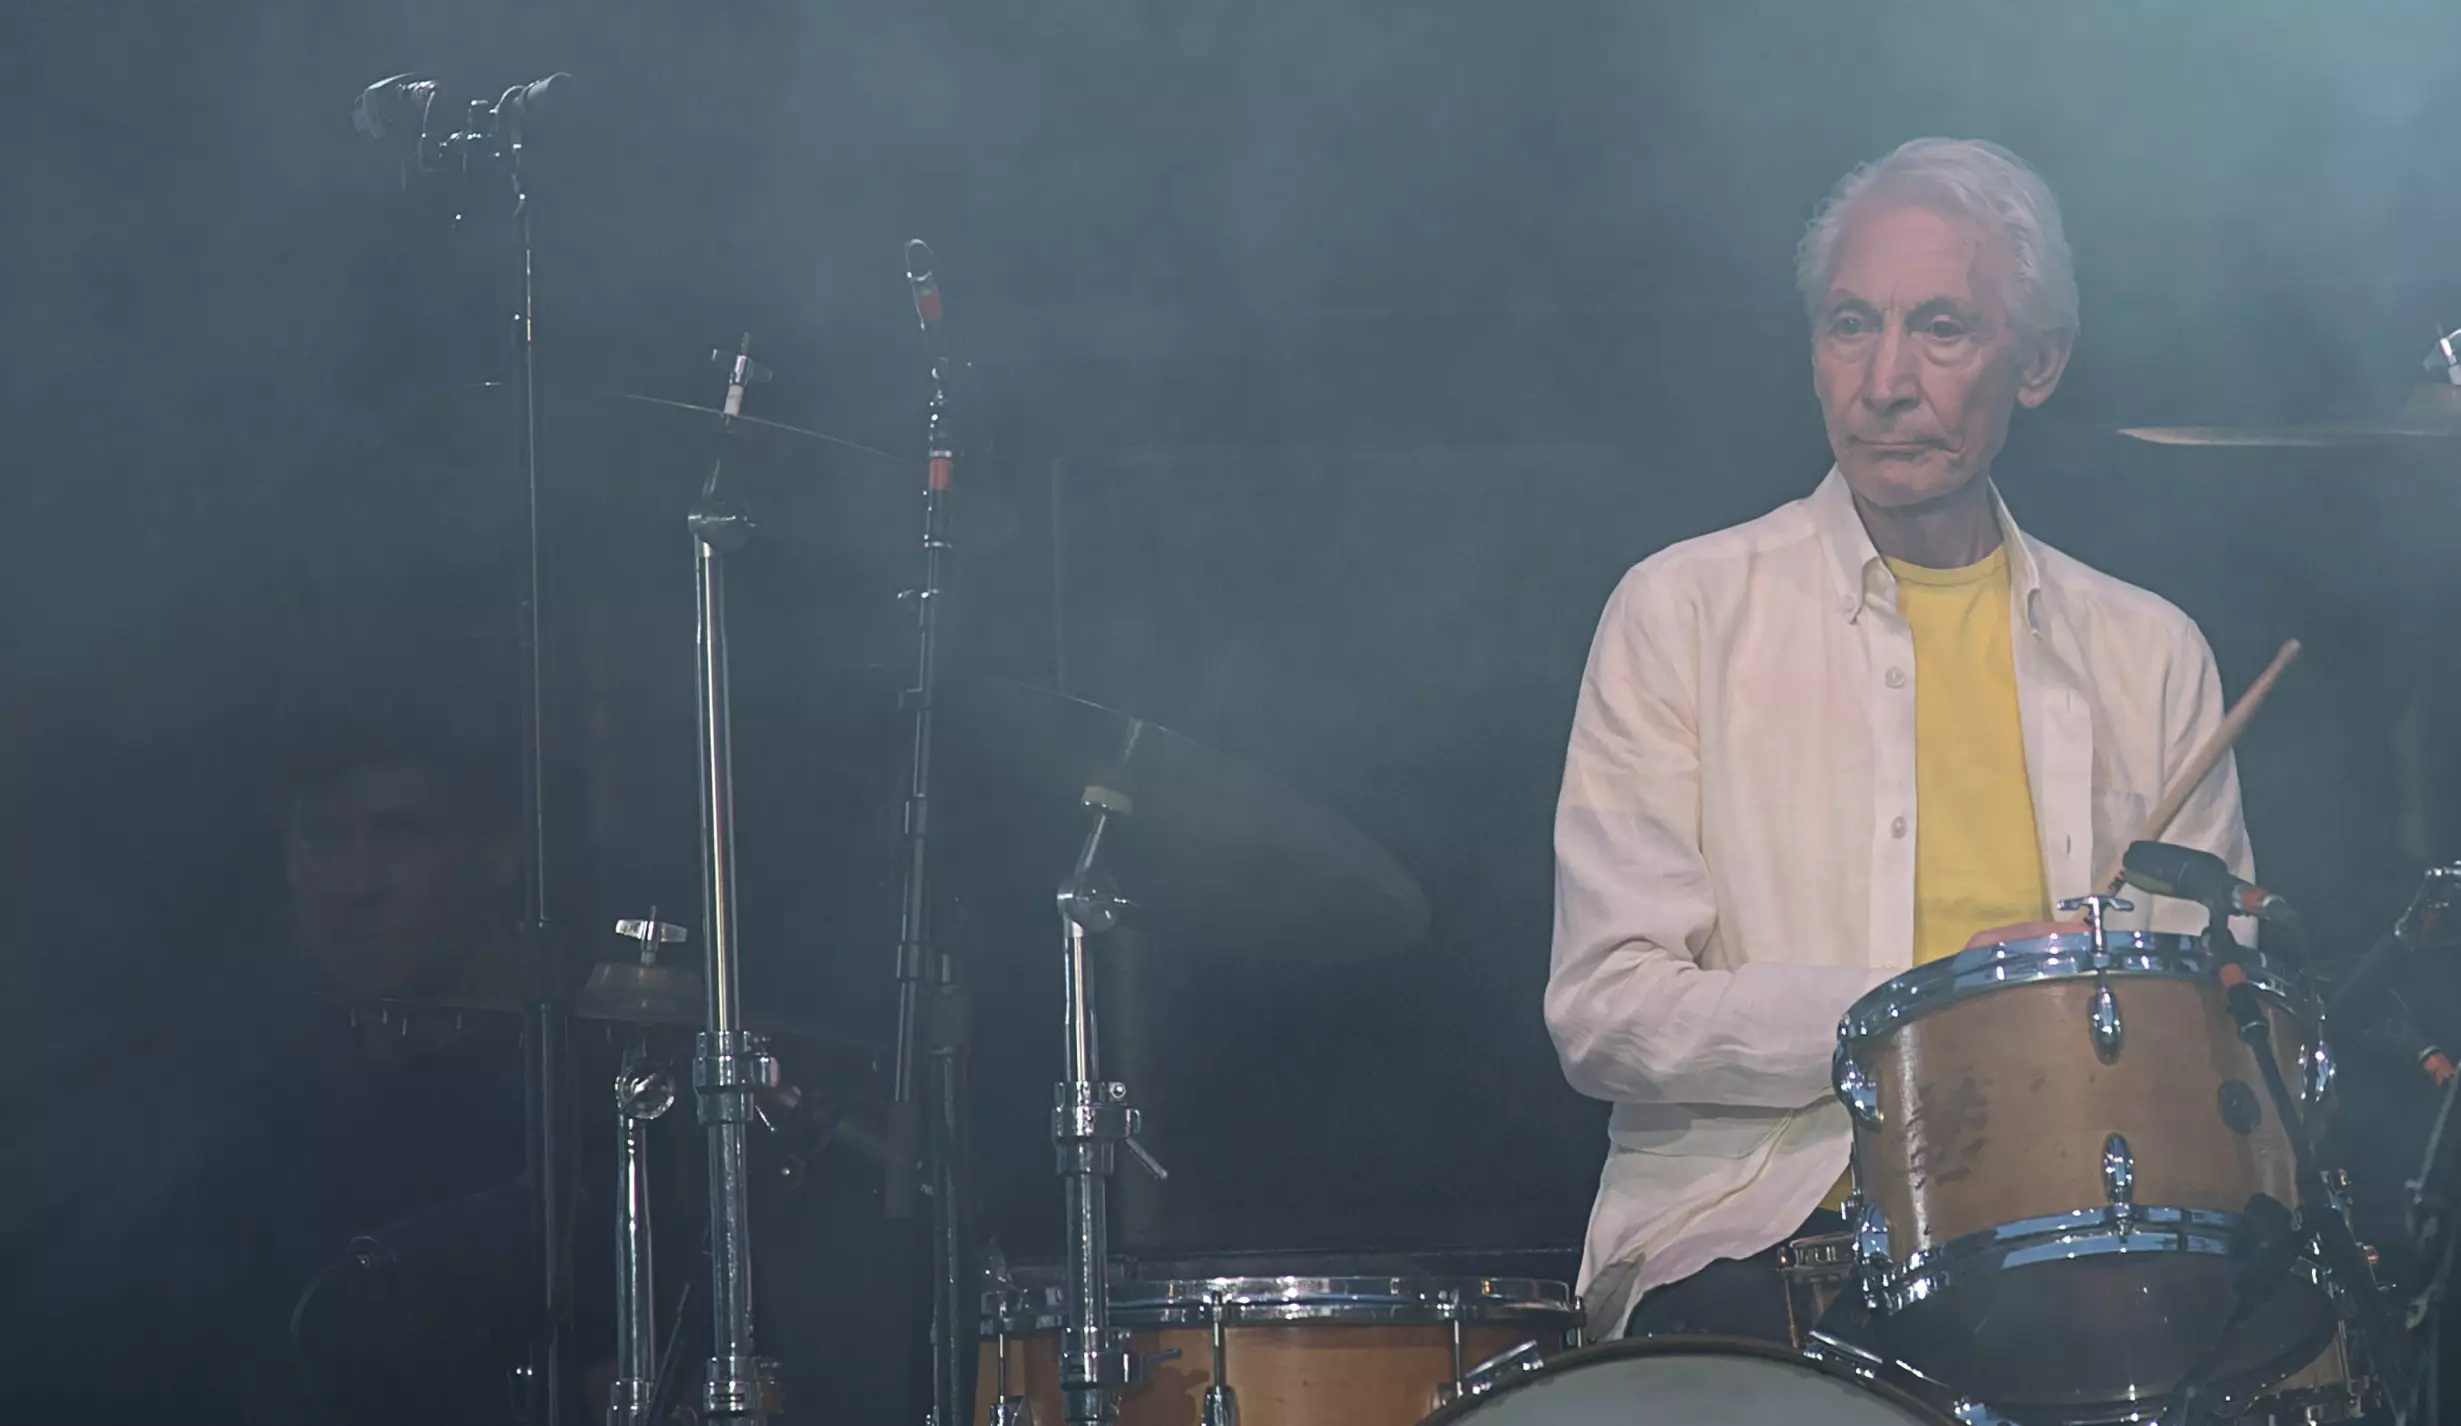 Charlie Watts on stage at a concert by the Rolling Stones during their European tour in 2018.